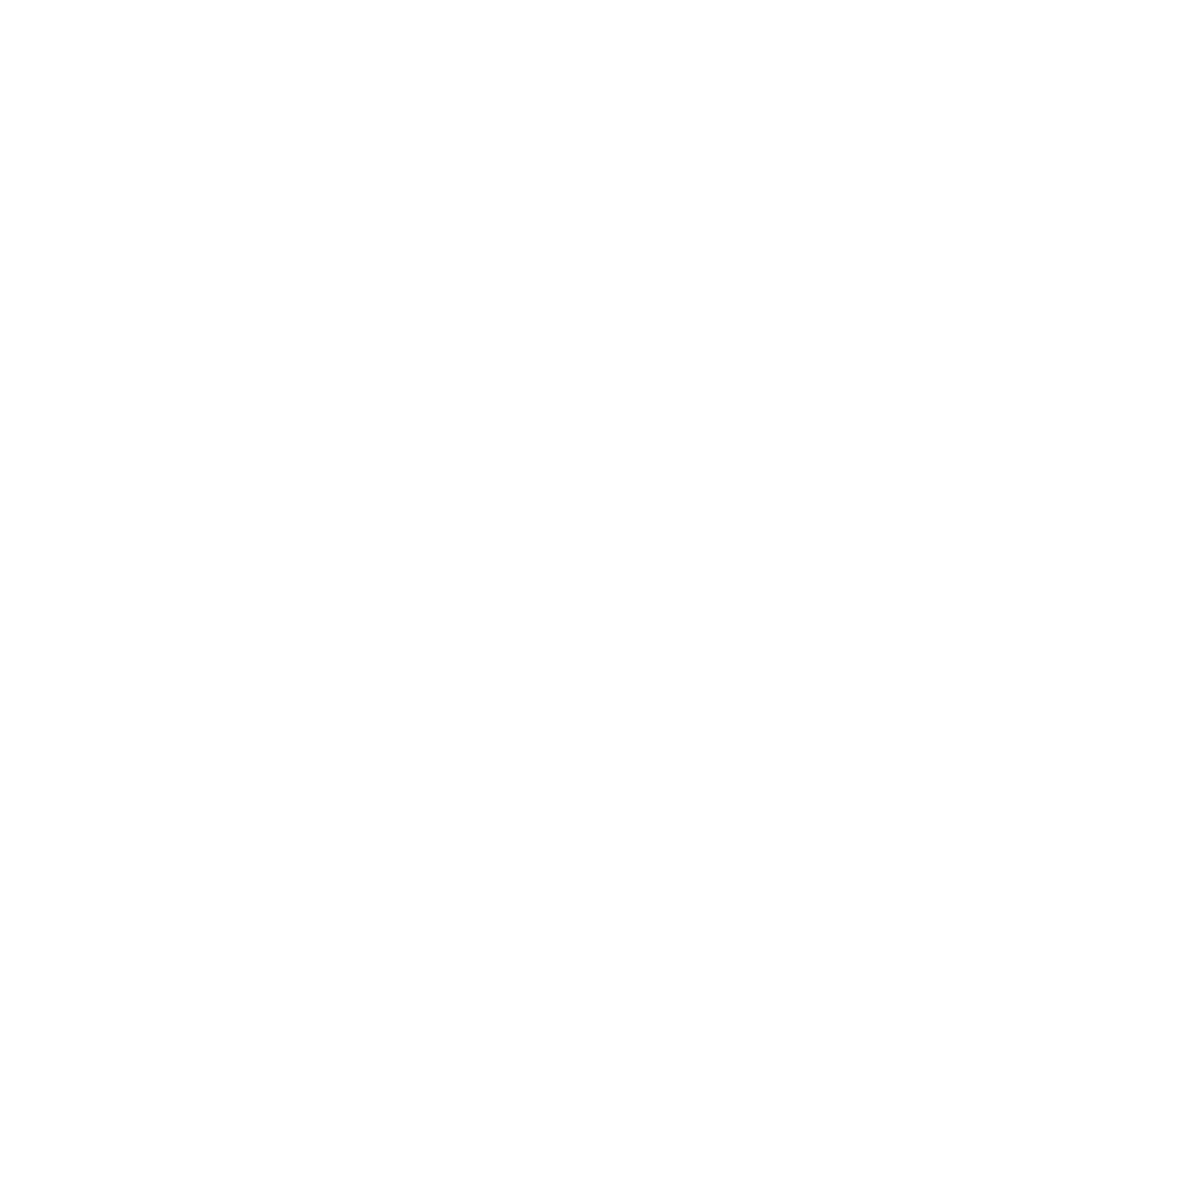 west auckland boxing logo in white